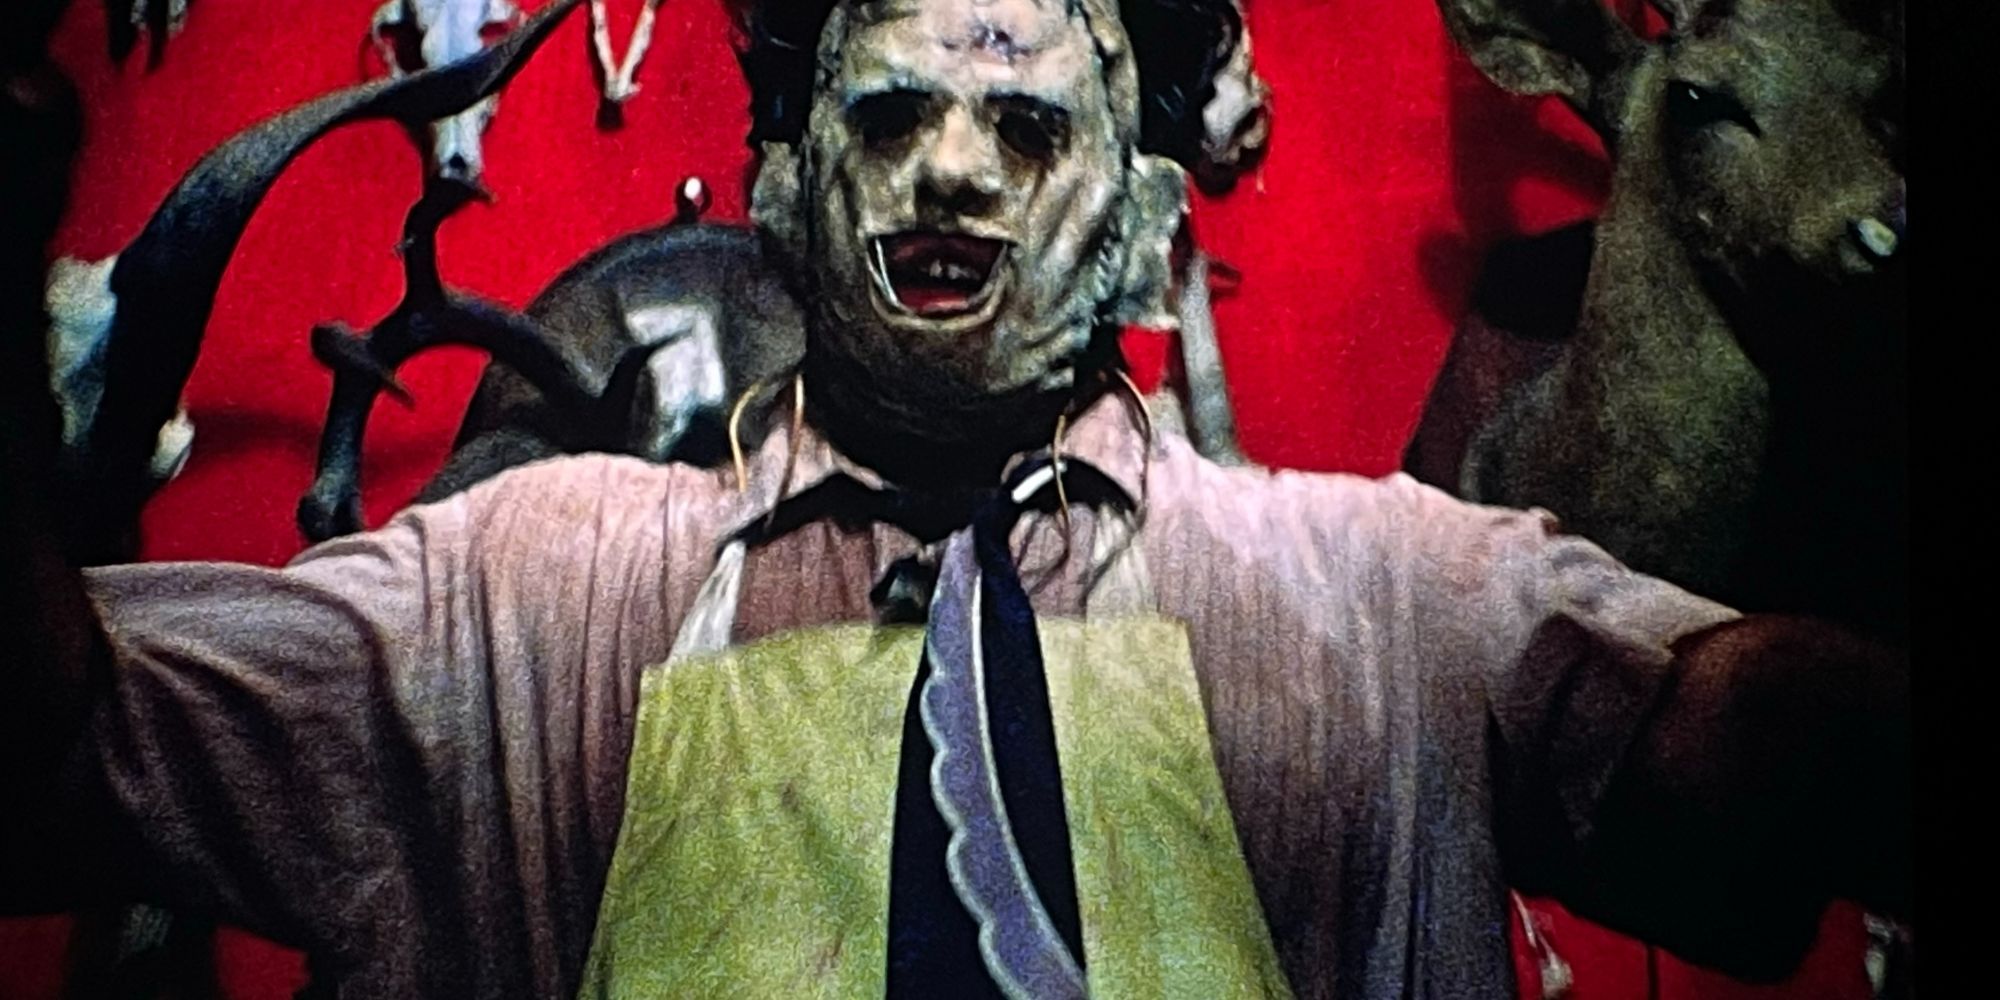 Leatherface stands in the doorway after killing Kirk in the Texas Chain Saw Massacre 1974